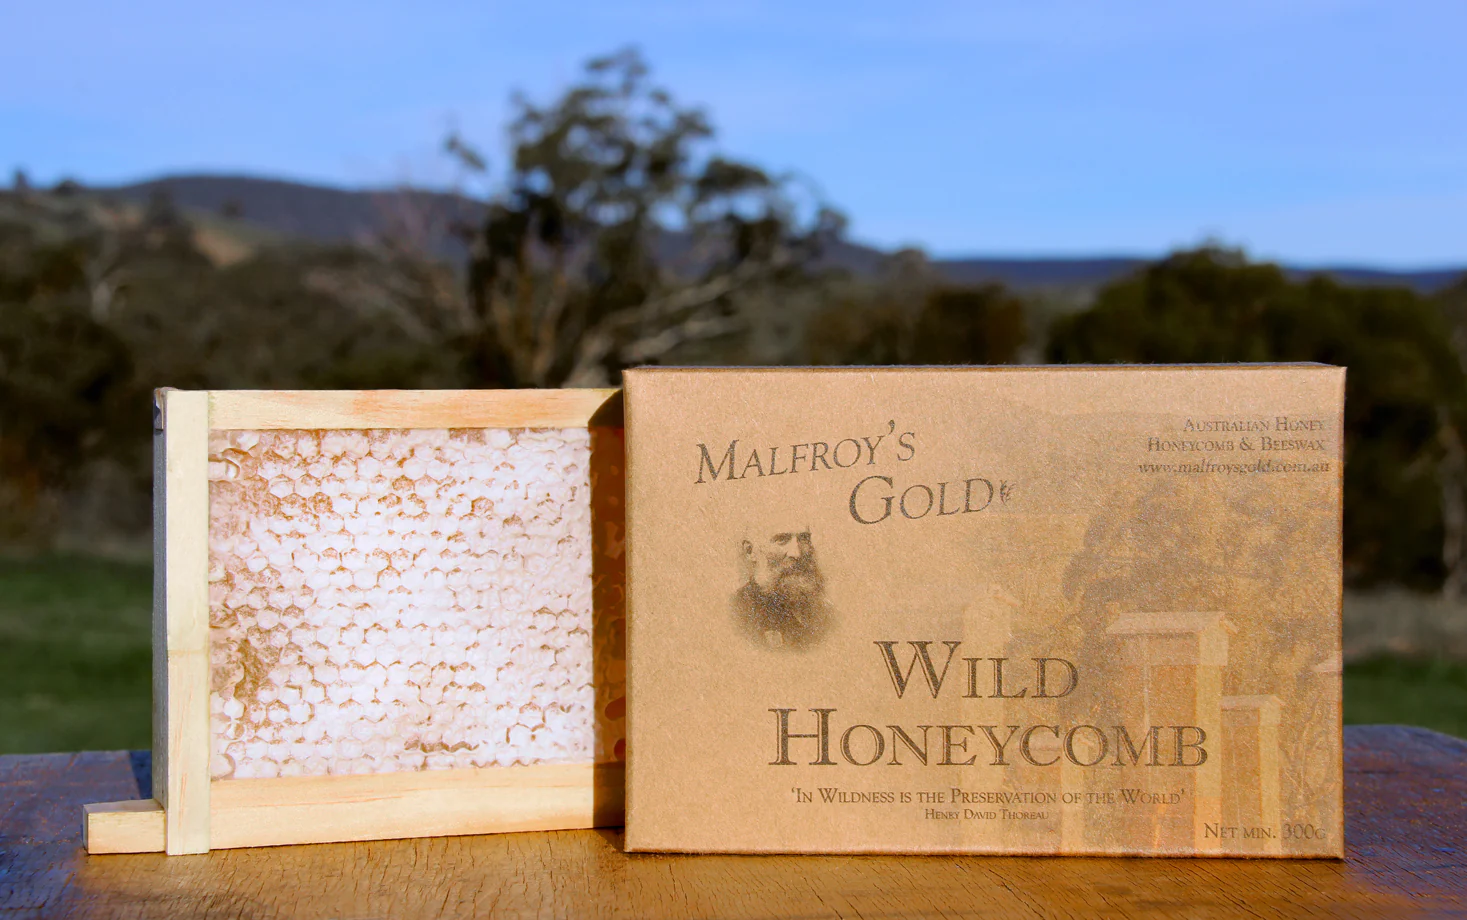 Malfroy's Gold Wild Honeycomb Section 300g